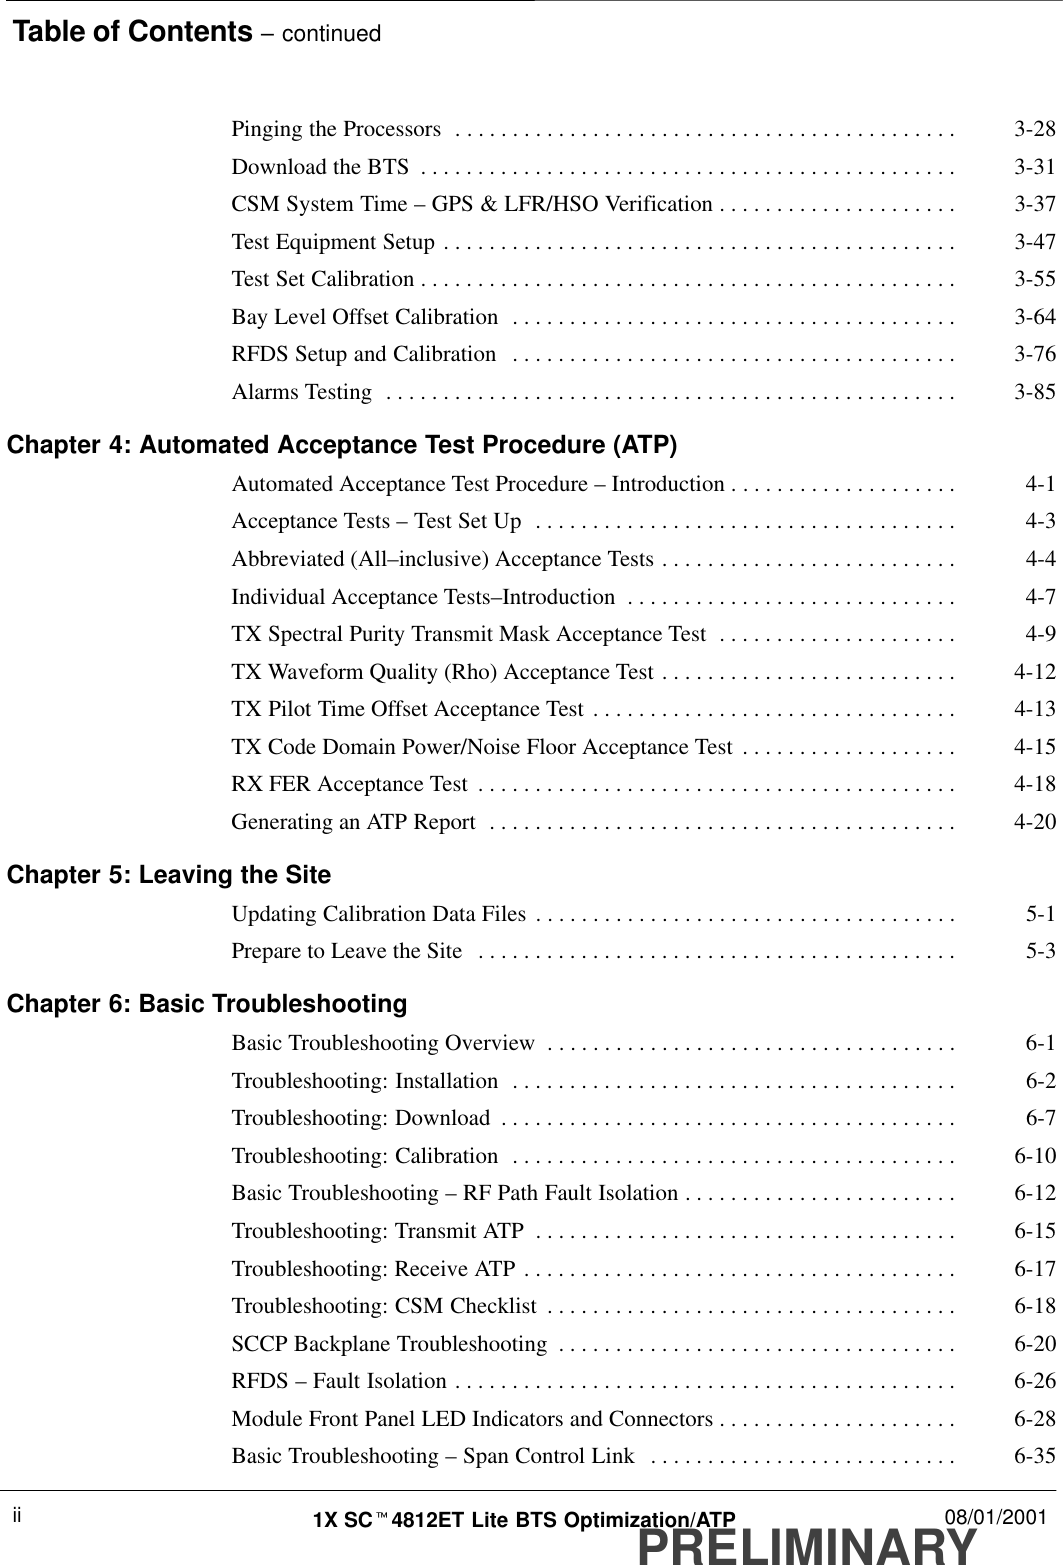 Table of Contents – continuedPRELIMINARY1X SCt4812ET Lite BTS Optimization/ATP 08/01/2001iiPinging the Processors 3-28. . . . . . . . . . . . . . . . . . . . . . . . . . . . . . . . . . . . . . . . . . . . Download the BTS 3-31. . . . . . . . . . . . . . . . . . . . . . . . . . . . . . . . . . . . . . . . . . . . . . . CSM System Time – GPS &amp; LFR/HSO Verification 3-37. . . . . . . . . . . . . . . . . . . . . Test Equipment Setup 3-47. . . . . . . . . . . . . . . . . . . . . . . . . . . . . . . . . . . . . . . . . . . . . Test Set Calibration 3-55. . . . . . . . . . . . . . . . . . . . . . . . . . . . . . . . . . . . . . . . . . . . . . . Bay Level Offset Calibration 3-64. . . . . . . . . . . . . . . . . . . . . . . . . . . . . . . . . . . . . . . RFDS Setup and Calibration 3-76. . . . . . . . . . . . . . . . . . . . . . . . . . . . . . . . . . . . . . . Alarms Testing 3-85. . . . . . . . . . . . . . . . . . . . . . . . . . . . . . . . . . . . . . . . . . . . . . . . . . Chapter 4: Automated Acceptance Test Procedure (ATP)Automated Acceptance Test Procedure – Introduction 4-1. . . . . . . . . . . . . . . . . . . . Acceptance Tests – Test Set Up 4-3. . . . . . . . . . . . . . . . . . . . . . . . . . . . . . . . . . . . . Abbreviated (All–inclusive) Acceptance Tests 4-4. . . . . . . . . . . . . . . . . . . . . . . . . . Individual Acceptance Tests–Introduction 4-7. . . . . . . . . . . . . . . . . . . . . . . . . . . . . TX Spectral Purity Transmit Mask Acceptance Test 4-9. . . . . . . . . . . . . . . . . . . . . TX Waveform Quality (Rho) Acceptance Test 4-12. . . . . . . . . . . . . . . . . . . . . . . . . . TX Pilot Time Offset Acceptance Test 4-13. . . . . . . . . . . . . . . . . . . . . . . . . . . . . . . . TX Code Domain Power/Noise Floor Acceptance Test 4-15. . . . . . . . . . . . . . . . . . . RX FER Acceptance Test 4-18. . . . . . . . . . . . . . . . . . . . . . . . . . . . . . . . . . . . . . . . . . Generating an ATP Report 4-20. . . . . . . . . . . . . . . . . . . . . . . . . . . . . . . . . . . . . . . . . Chapter 5: Leaving the SiteUpdating Calibration Data Files 5-1. . . . . . . . . . . . . . . . . . . . . . . . . . . . . . . . . . . . . Prepare to Leave the Site 5-3. . . . . . . . . . . . . . . . . . . . . . . . . . . . . . . . . . . . . . . . . . Chapter 6: Basic TroubleshootingBasic Troubleshooting Overview 6-1. . . . . . . . . . . . . . . . . . . . . . . . . . . . . . . . . . . . Troubleshooting: Installation 6-2. . . . . . . . . . . . . . . . . . . . . . . . . . . . . . . . . . . . . . . Troubleshooting: Download 6-7. . . . . . . . . . . . . . . . . . . . . . . . . . . . . . . . . . . . . . . . Troubleshooting: Calibration 6-10. . . . . . . . . . . . . . . . . . . . . . . . . . . . . . . . . . . . . . . Basic Troubleshooting – RF Path Fault Isolation 6-12. . . . . . . . . . . . . . . . . . . . . . . . Troubleshooting: Transmit ATP 6-15. . . . . . . . . . . . . . . . . . . . . . . . . . . . . . . . . . . . . Troubleshooting: Receive ATP 6-17. . . . . . . . . . . . . . . . . . . . . . . . . . . . . . . . . . . . . . Troubleshooting: CSM Checklist 6-18. . . . . . . . . . . . . . . . . . . . . . . . . . . . . . . . . . . . SCCP Backplane Troubleshooting 6-20. . . . . . . . . . . . . . . . . . . . . . . . . . . . . . . . . . . RFDS – Fault Isolation 6-26. . . . . . . . . . . . . . . . . . . . . . . . . . . . . . . . . . . . . . . . . . . . Module Front Panel LED Indicators and Connectors 6-28. . . . . . . . . . . . . . . . . . . . . Basic Troubleshooting – Span Control Link 6-35. . . . . . . . . . . . . . . . . . . . . . . . . . . 